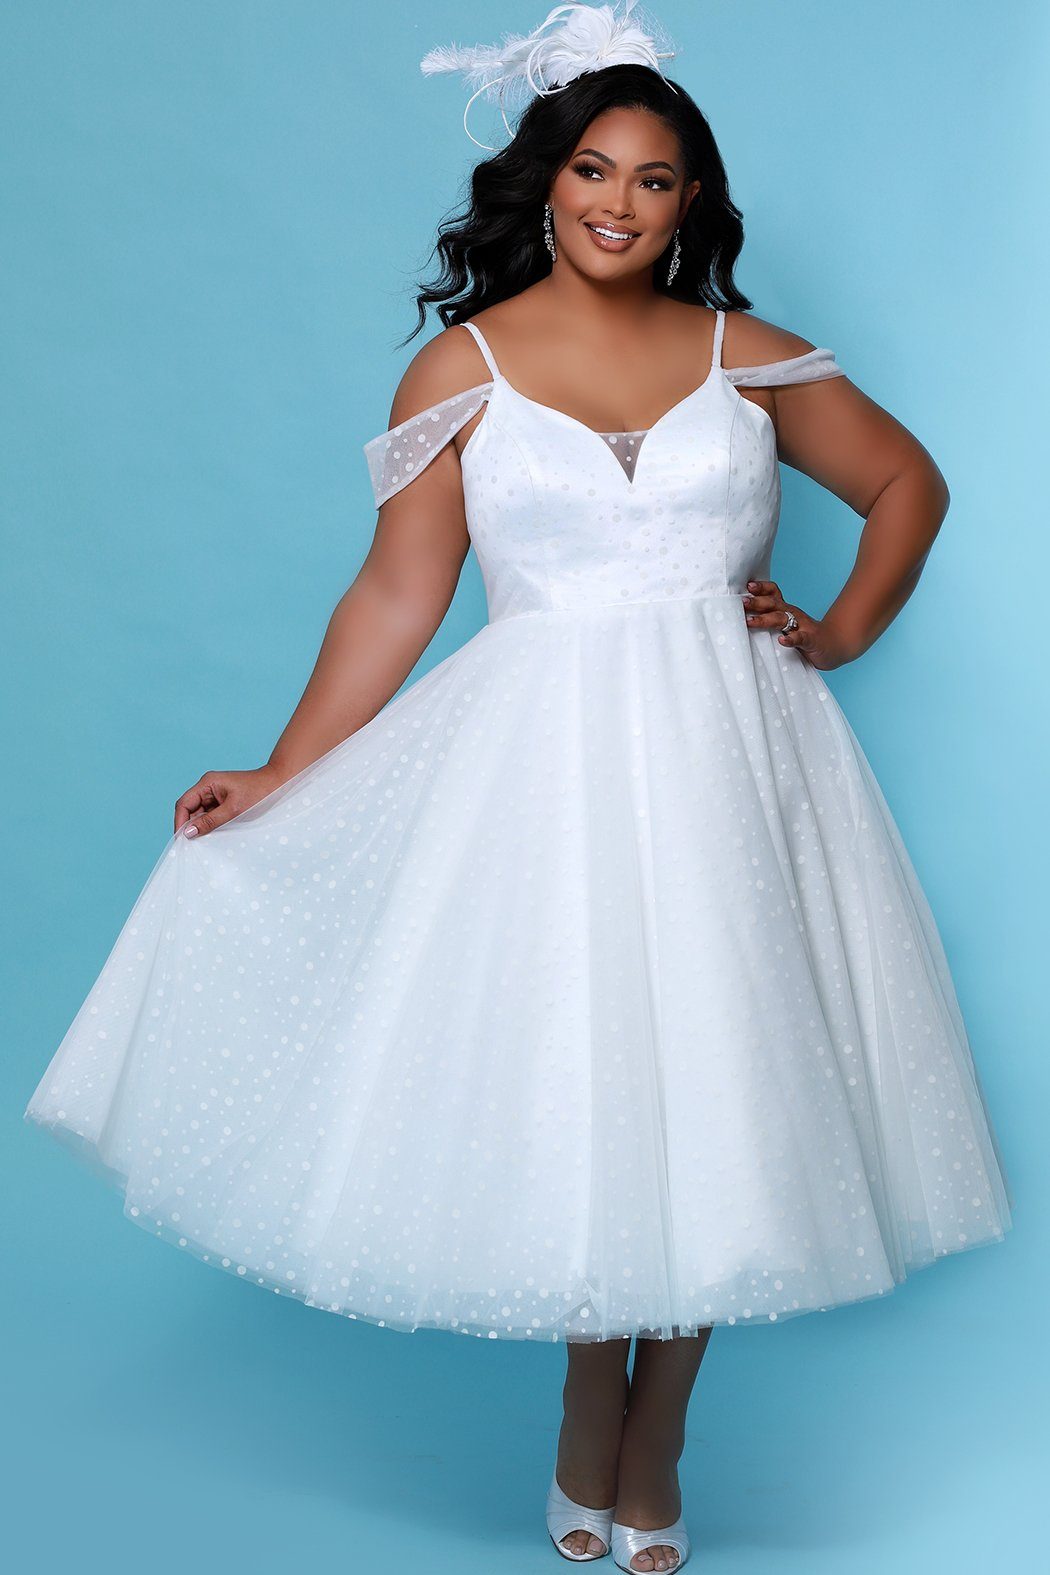 Plus Size Bridal Gowns Fit Tips and Trends | Today's Bride